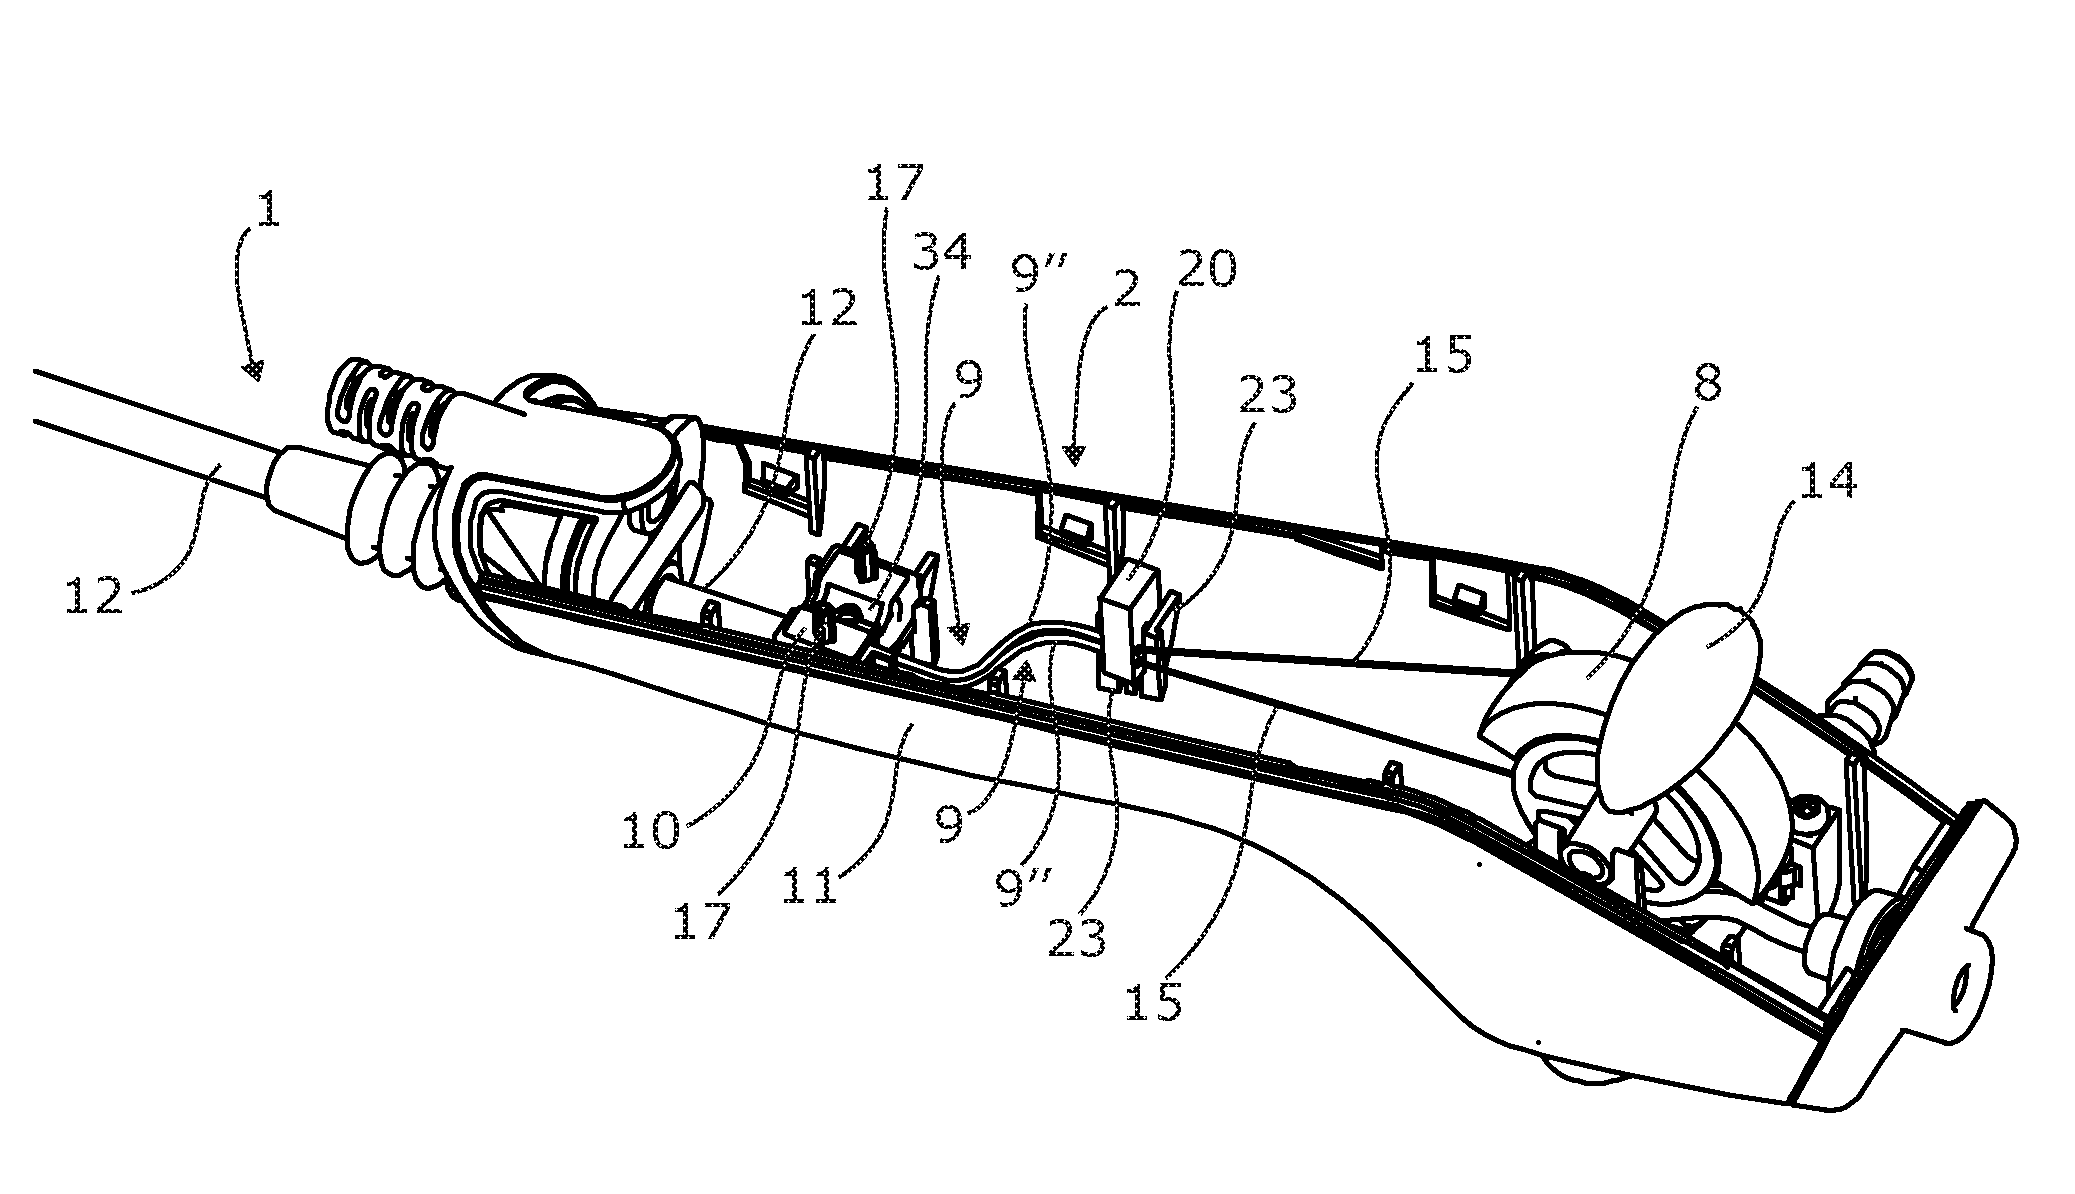 Apparatus for maintaining a tensioned pull-wire in an endoscope